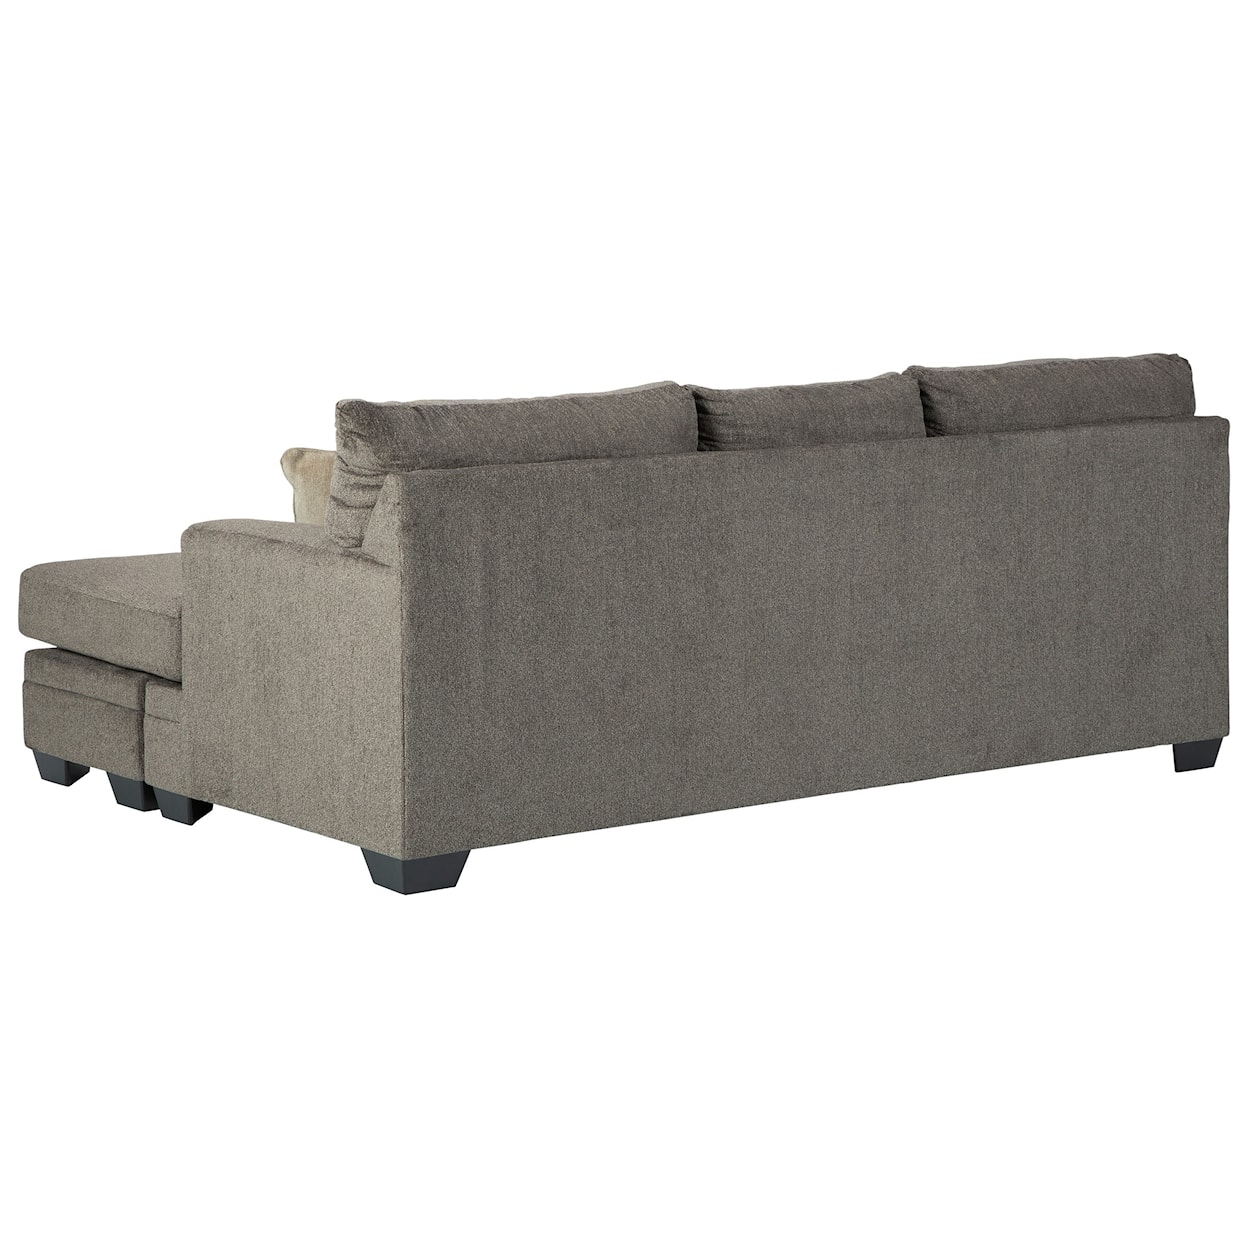 Signature Design by Ashley Furniture Dorsten Sofa with Chaise